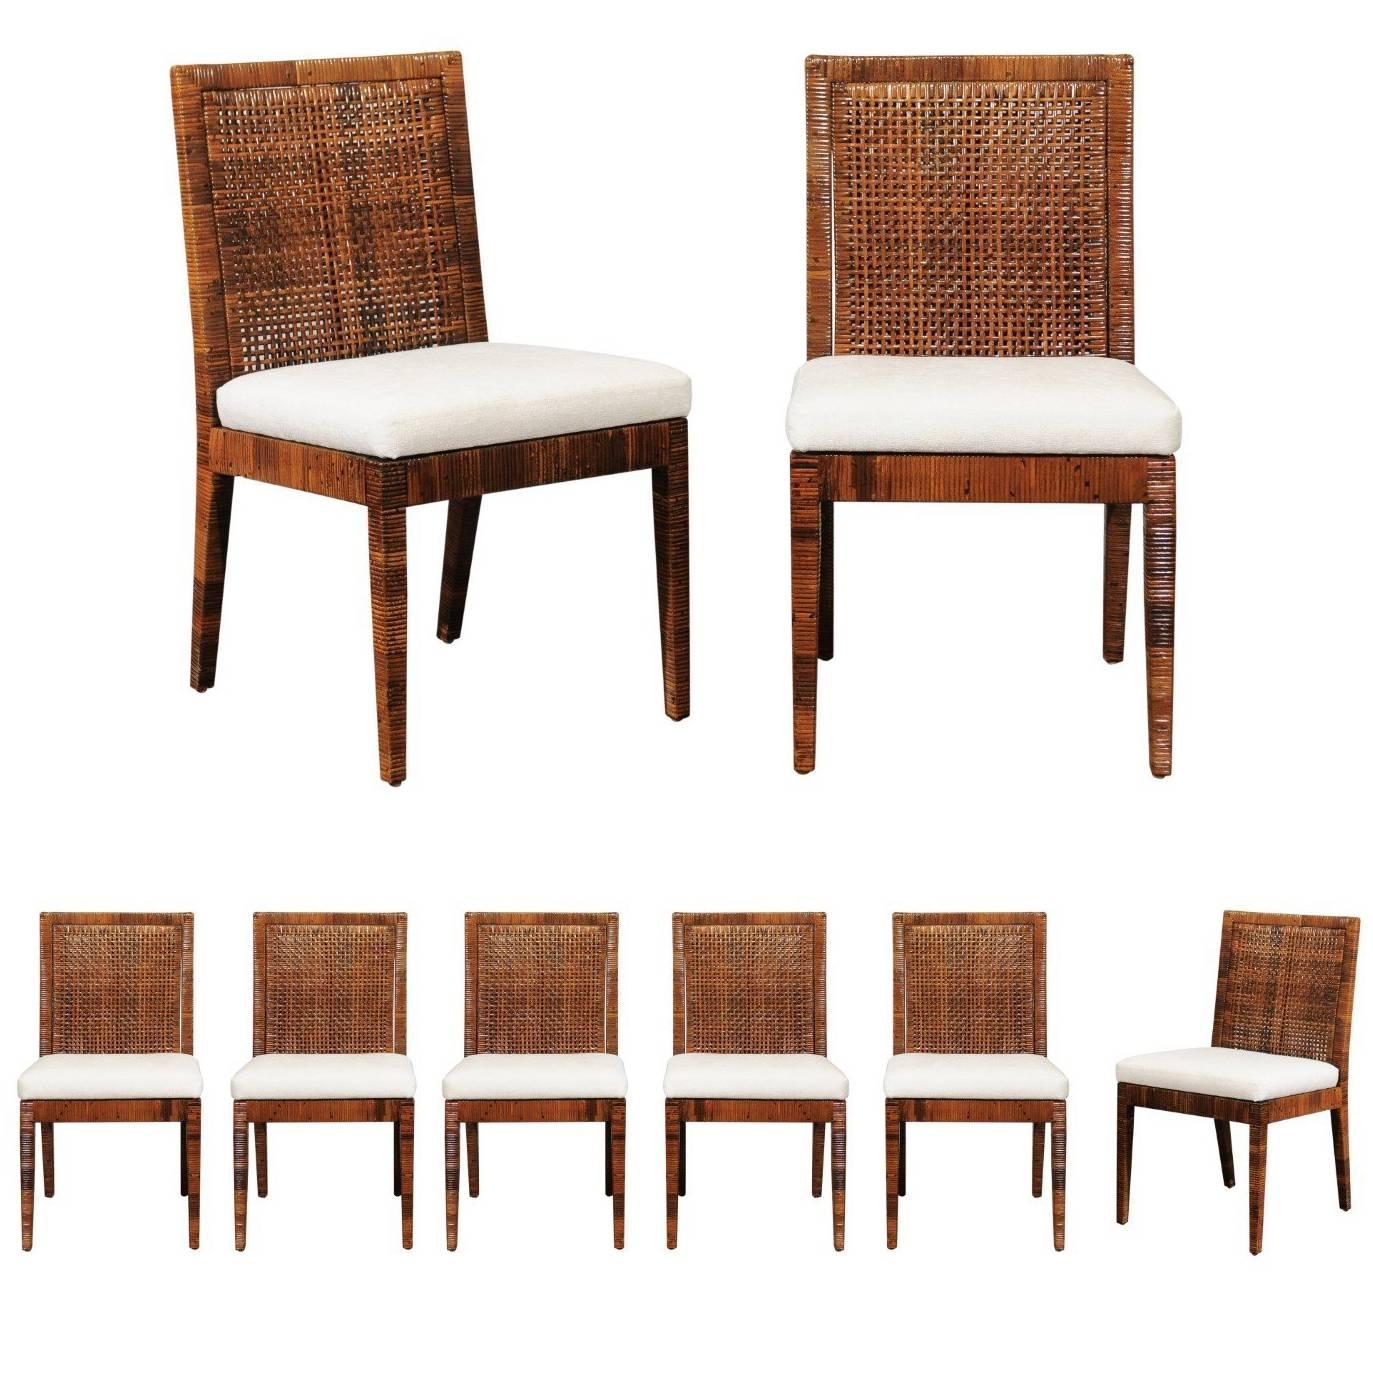 Exceptional Set of Eight Vintage Caramel Cane Dining Chairs by Bielecky Brothers